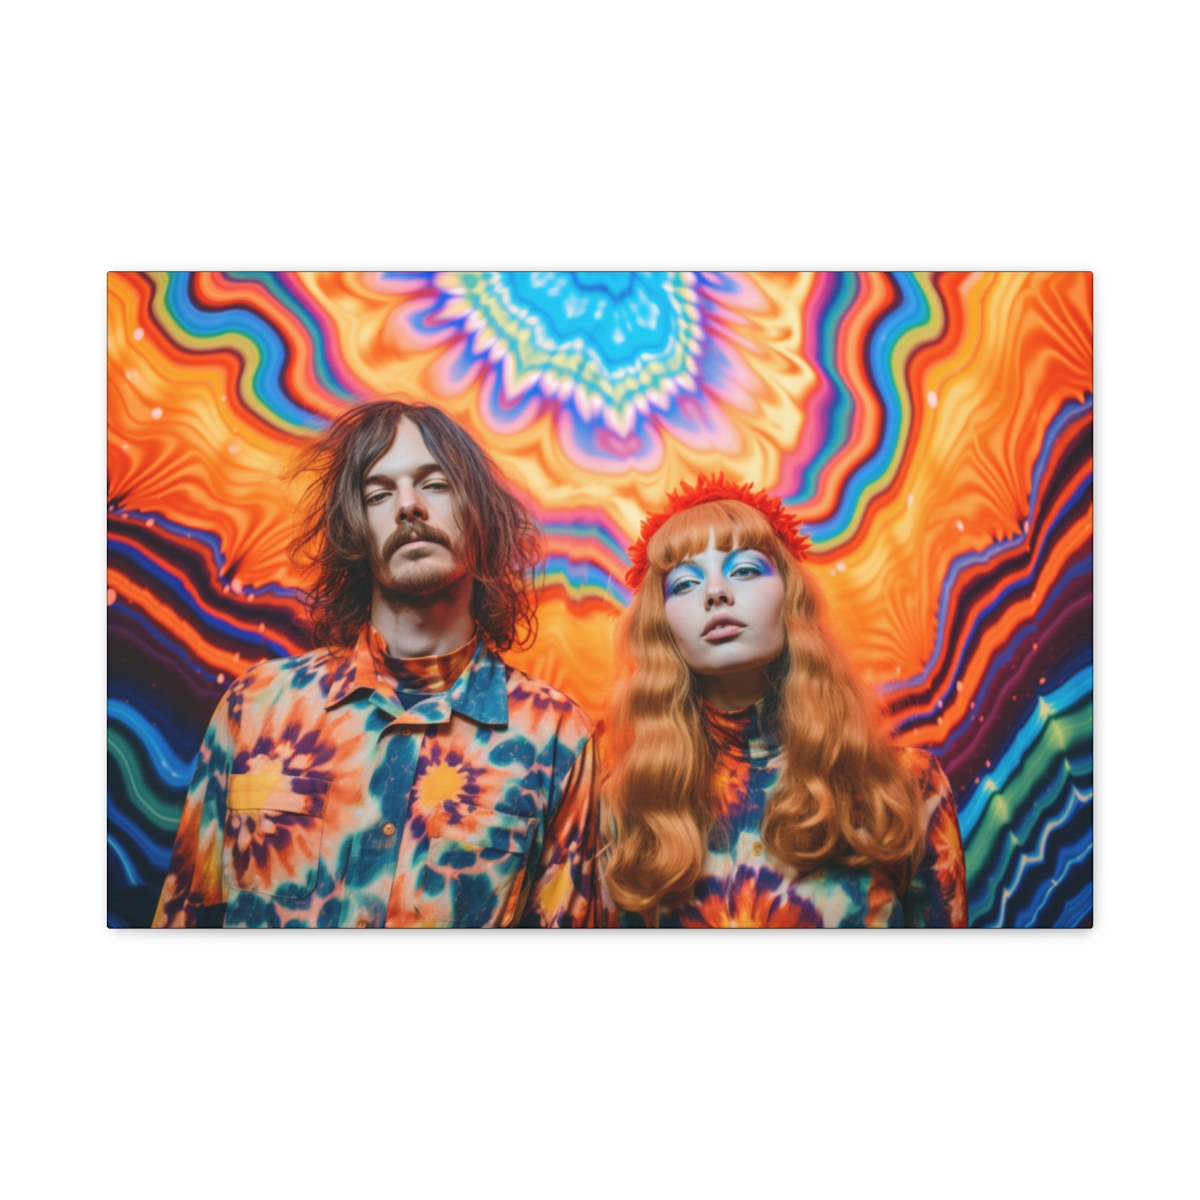 Hippie Psychedelic Art Canvas Print: Make Love, More Love